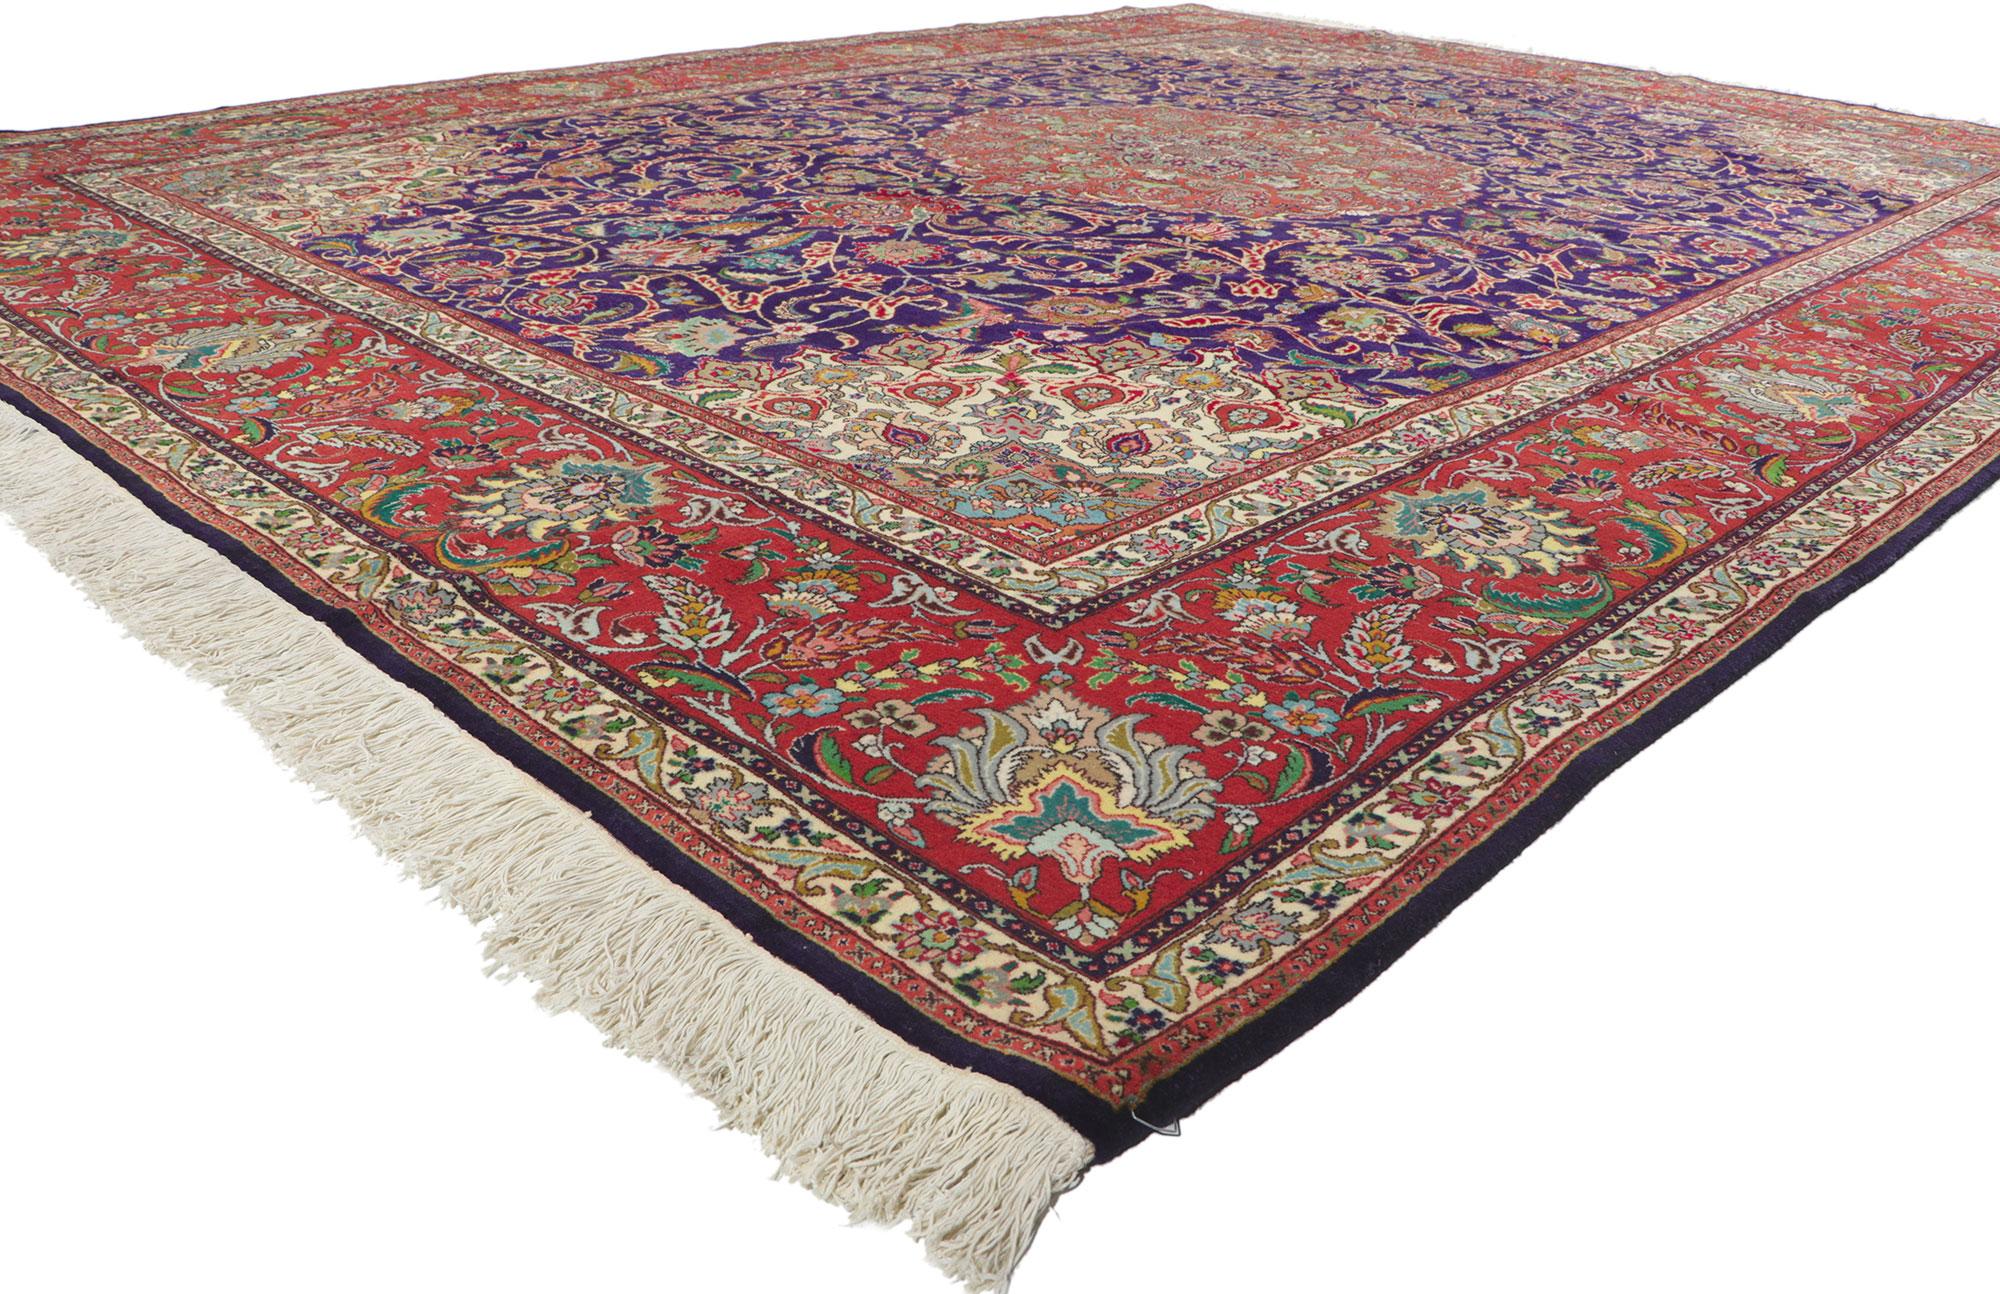 61110 Vintage Persian Tabriz Rug, 09'08 x 12'11.
Emanating a timeless floral design, incredible detail and texture, this hand knotted wool vintage Persian Tabriz rug is a captivating vision of woven beauty. The ornate details and sophisticated